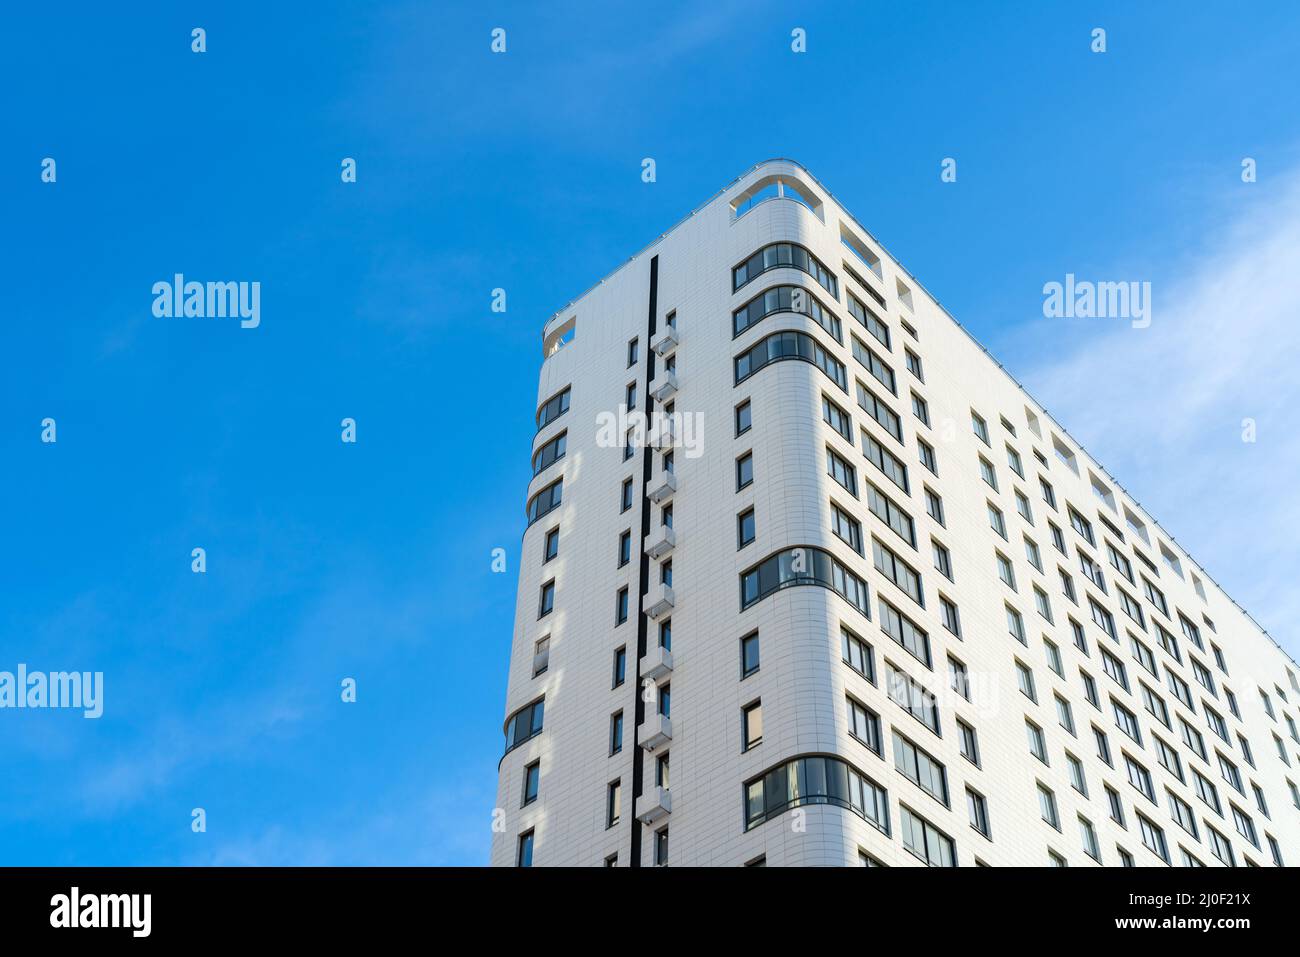 Tall white modern house. Urban architecture on a bright summer day. Stock Photo